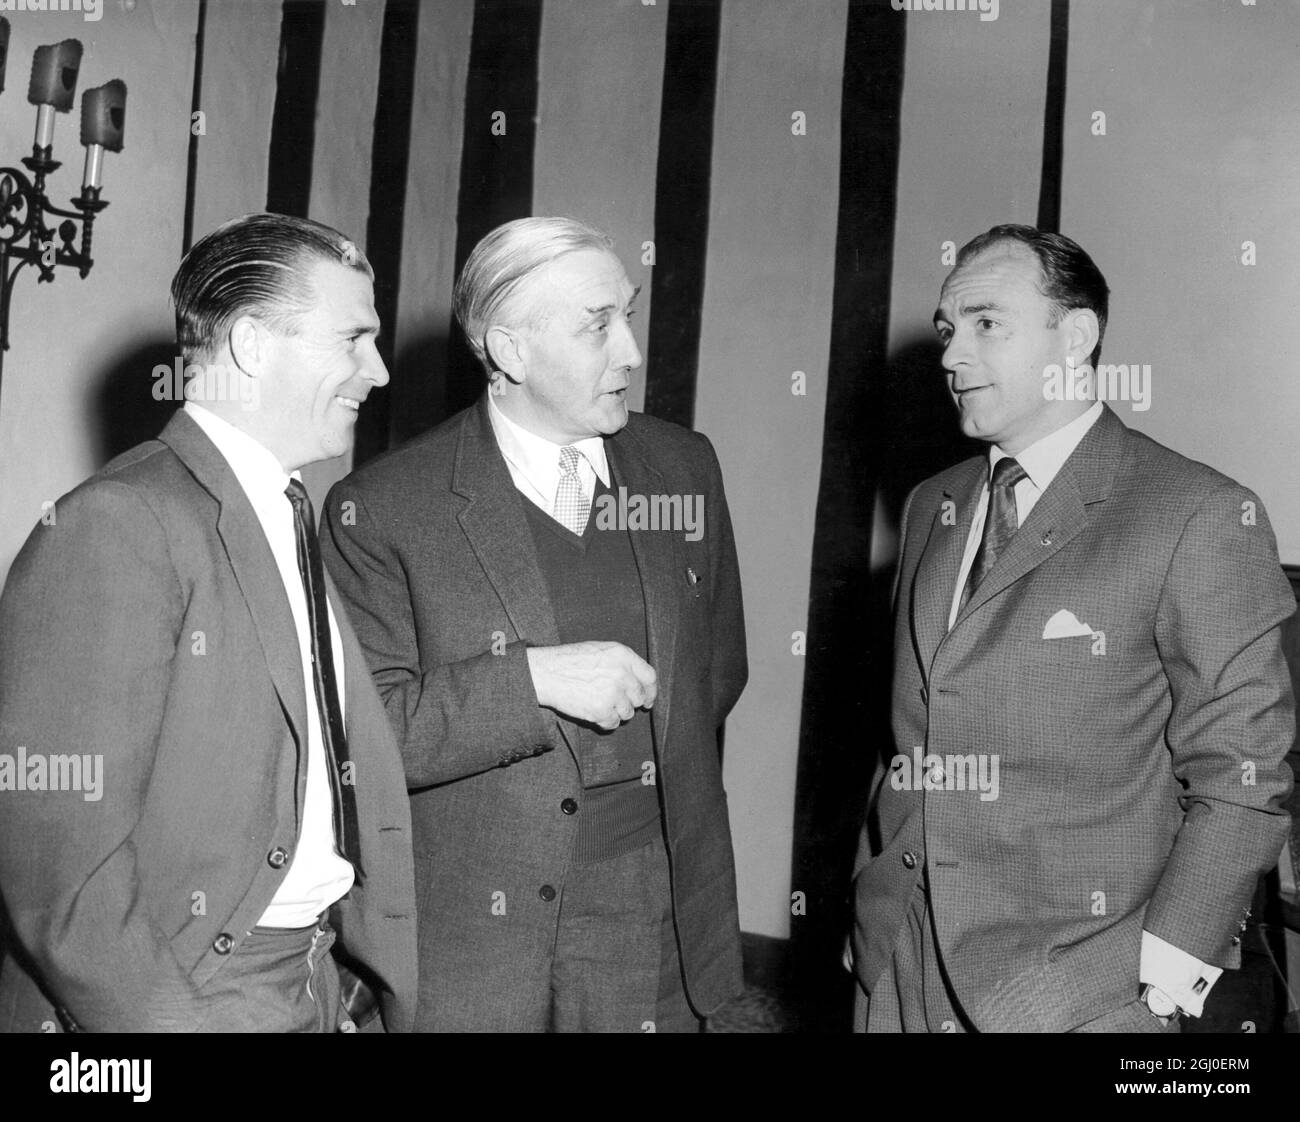 Mr Arthur Rowe (centre) manager of Crystal Palace with two of Real Madrid's football stars Ferenc Puskas (left) and Alfredo Di Stefano (right), at the reception of the Park Lane Hotel. Real Madrid will play Crystal Palace in a friendly match at Selhurst Park. 16th April 1962. Stock Photo